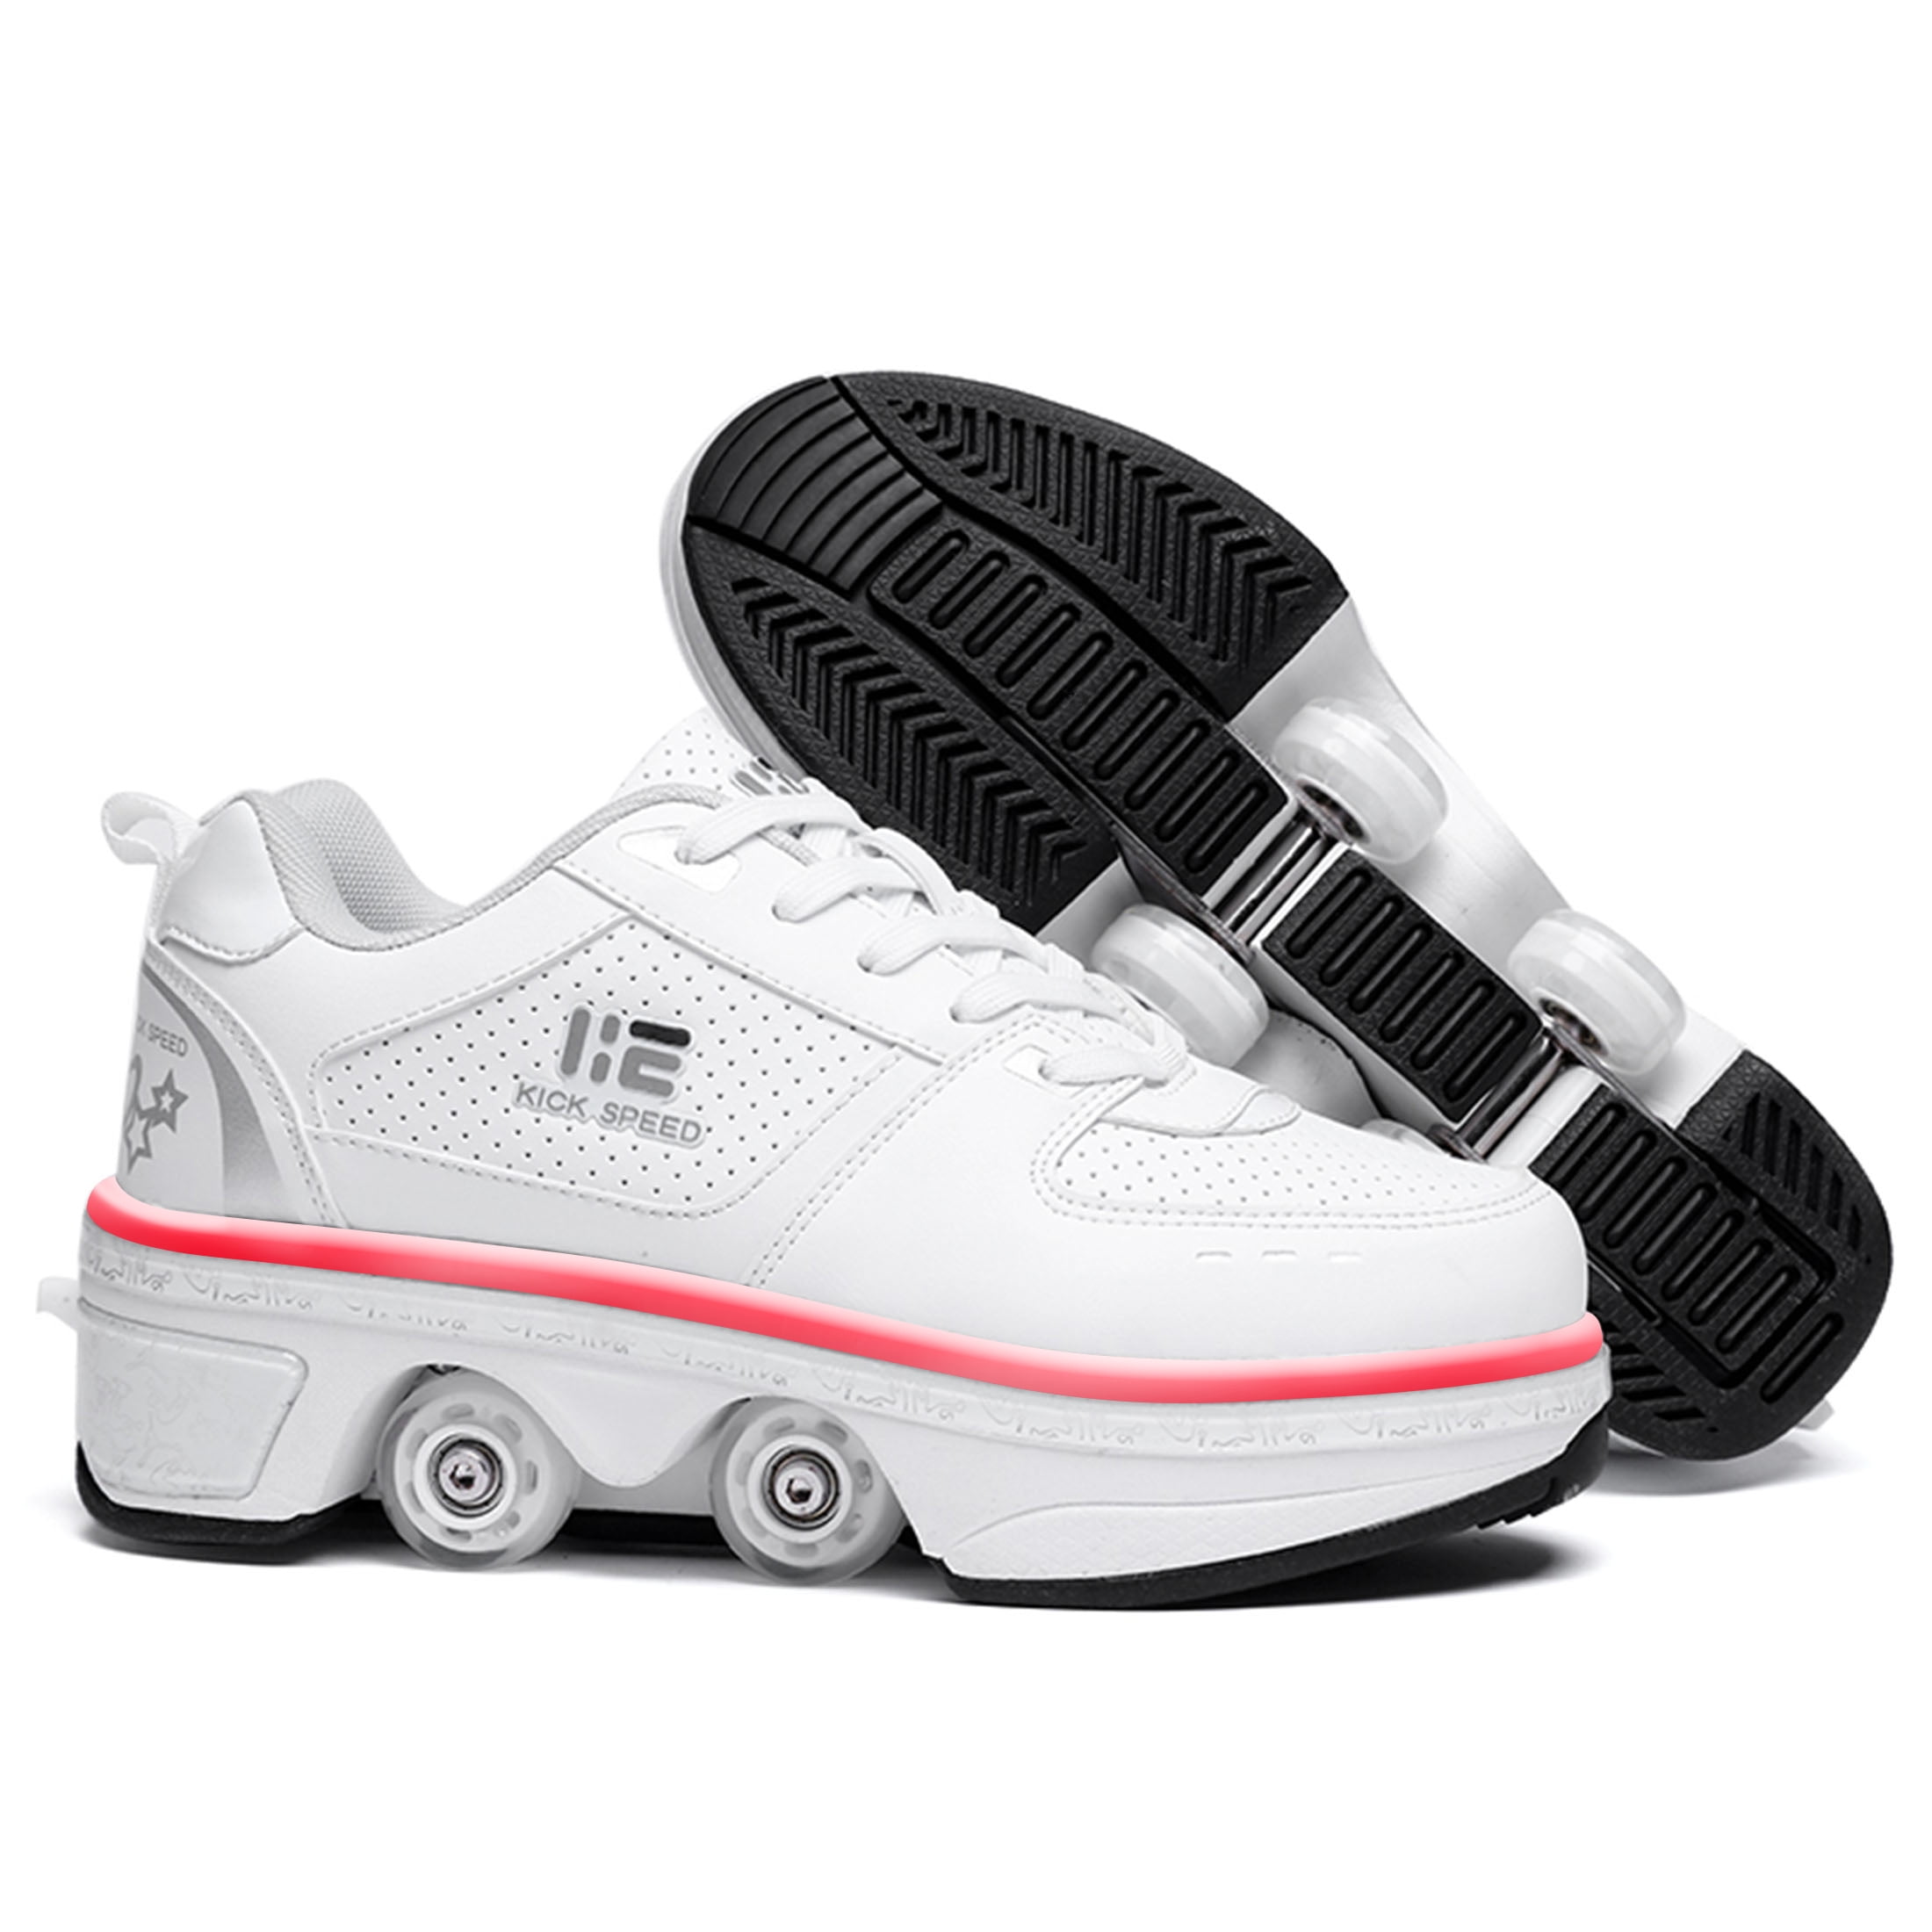 Problemer lanthan sagsøger KOFUBOKE Roller Skate Shoes - Sneakers - Roller Shoes 2-in-1 Suitable for  Outdoor Sports Skating Invisible Roller Skates The Best Choice for Building  Confidence Style - Walmart.com